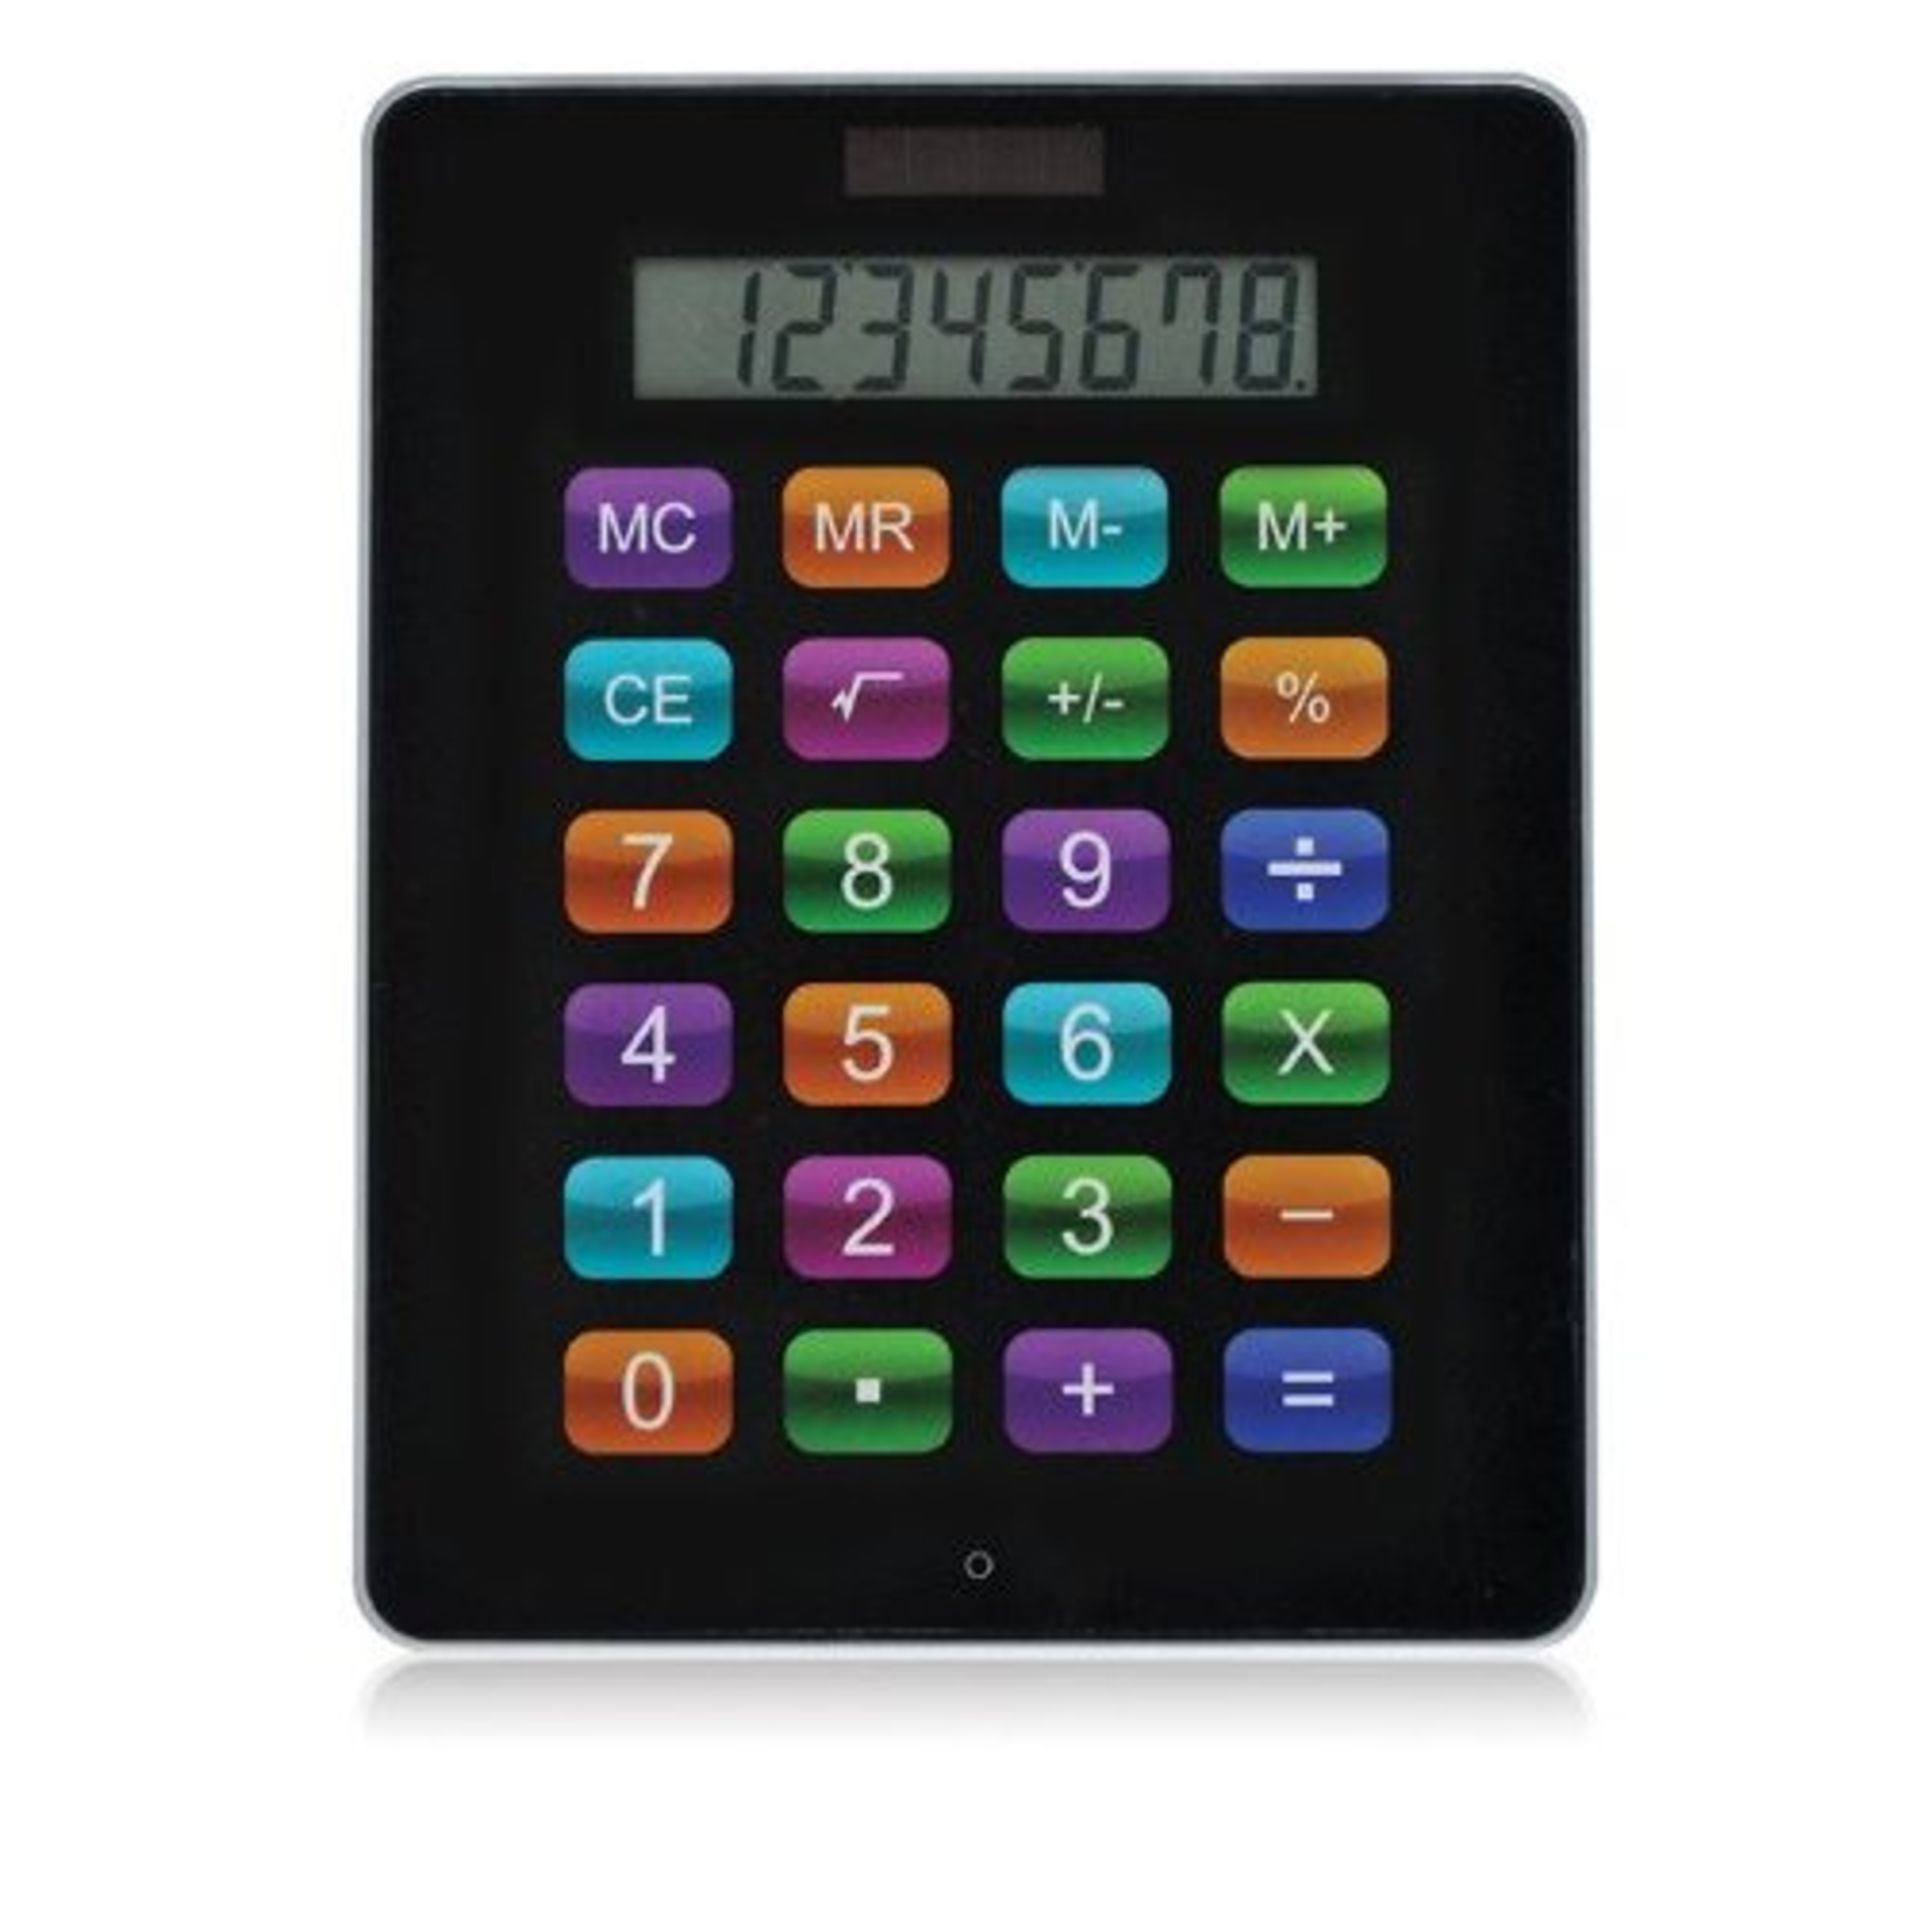 V Brand New Ipad Calculator-Battery powered with solar backup X 2 Bid price to be multiplied by Two